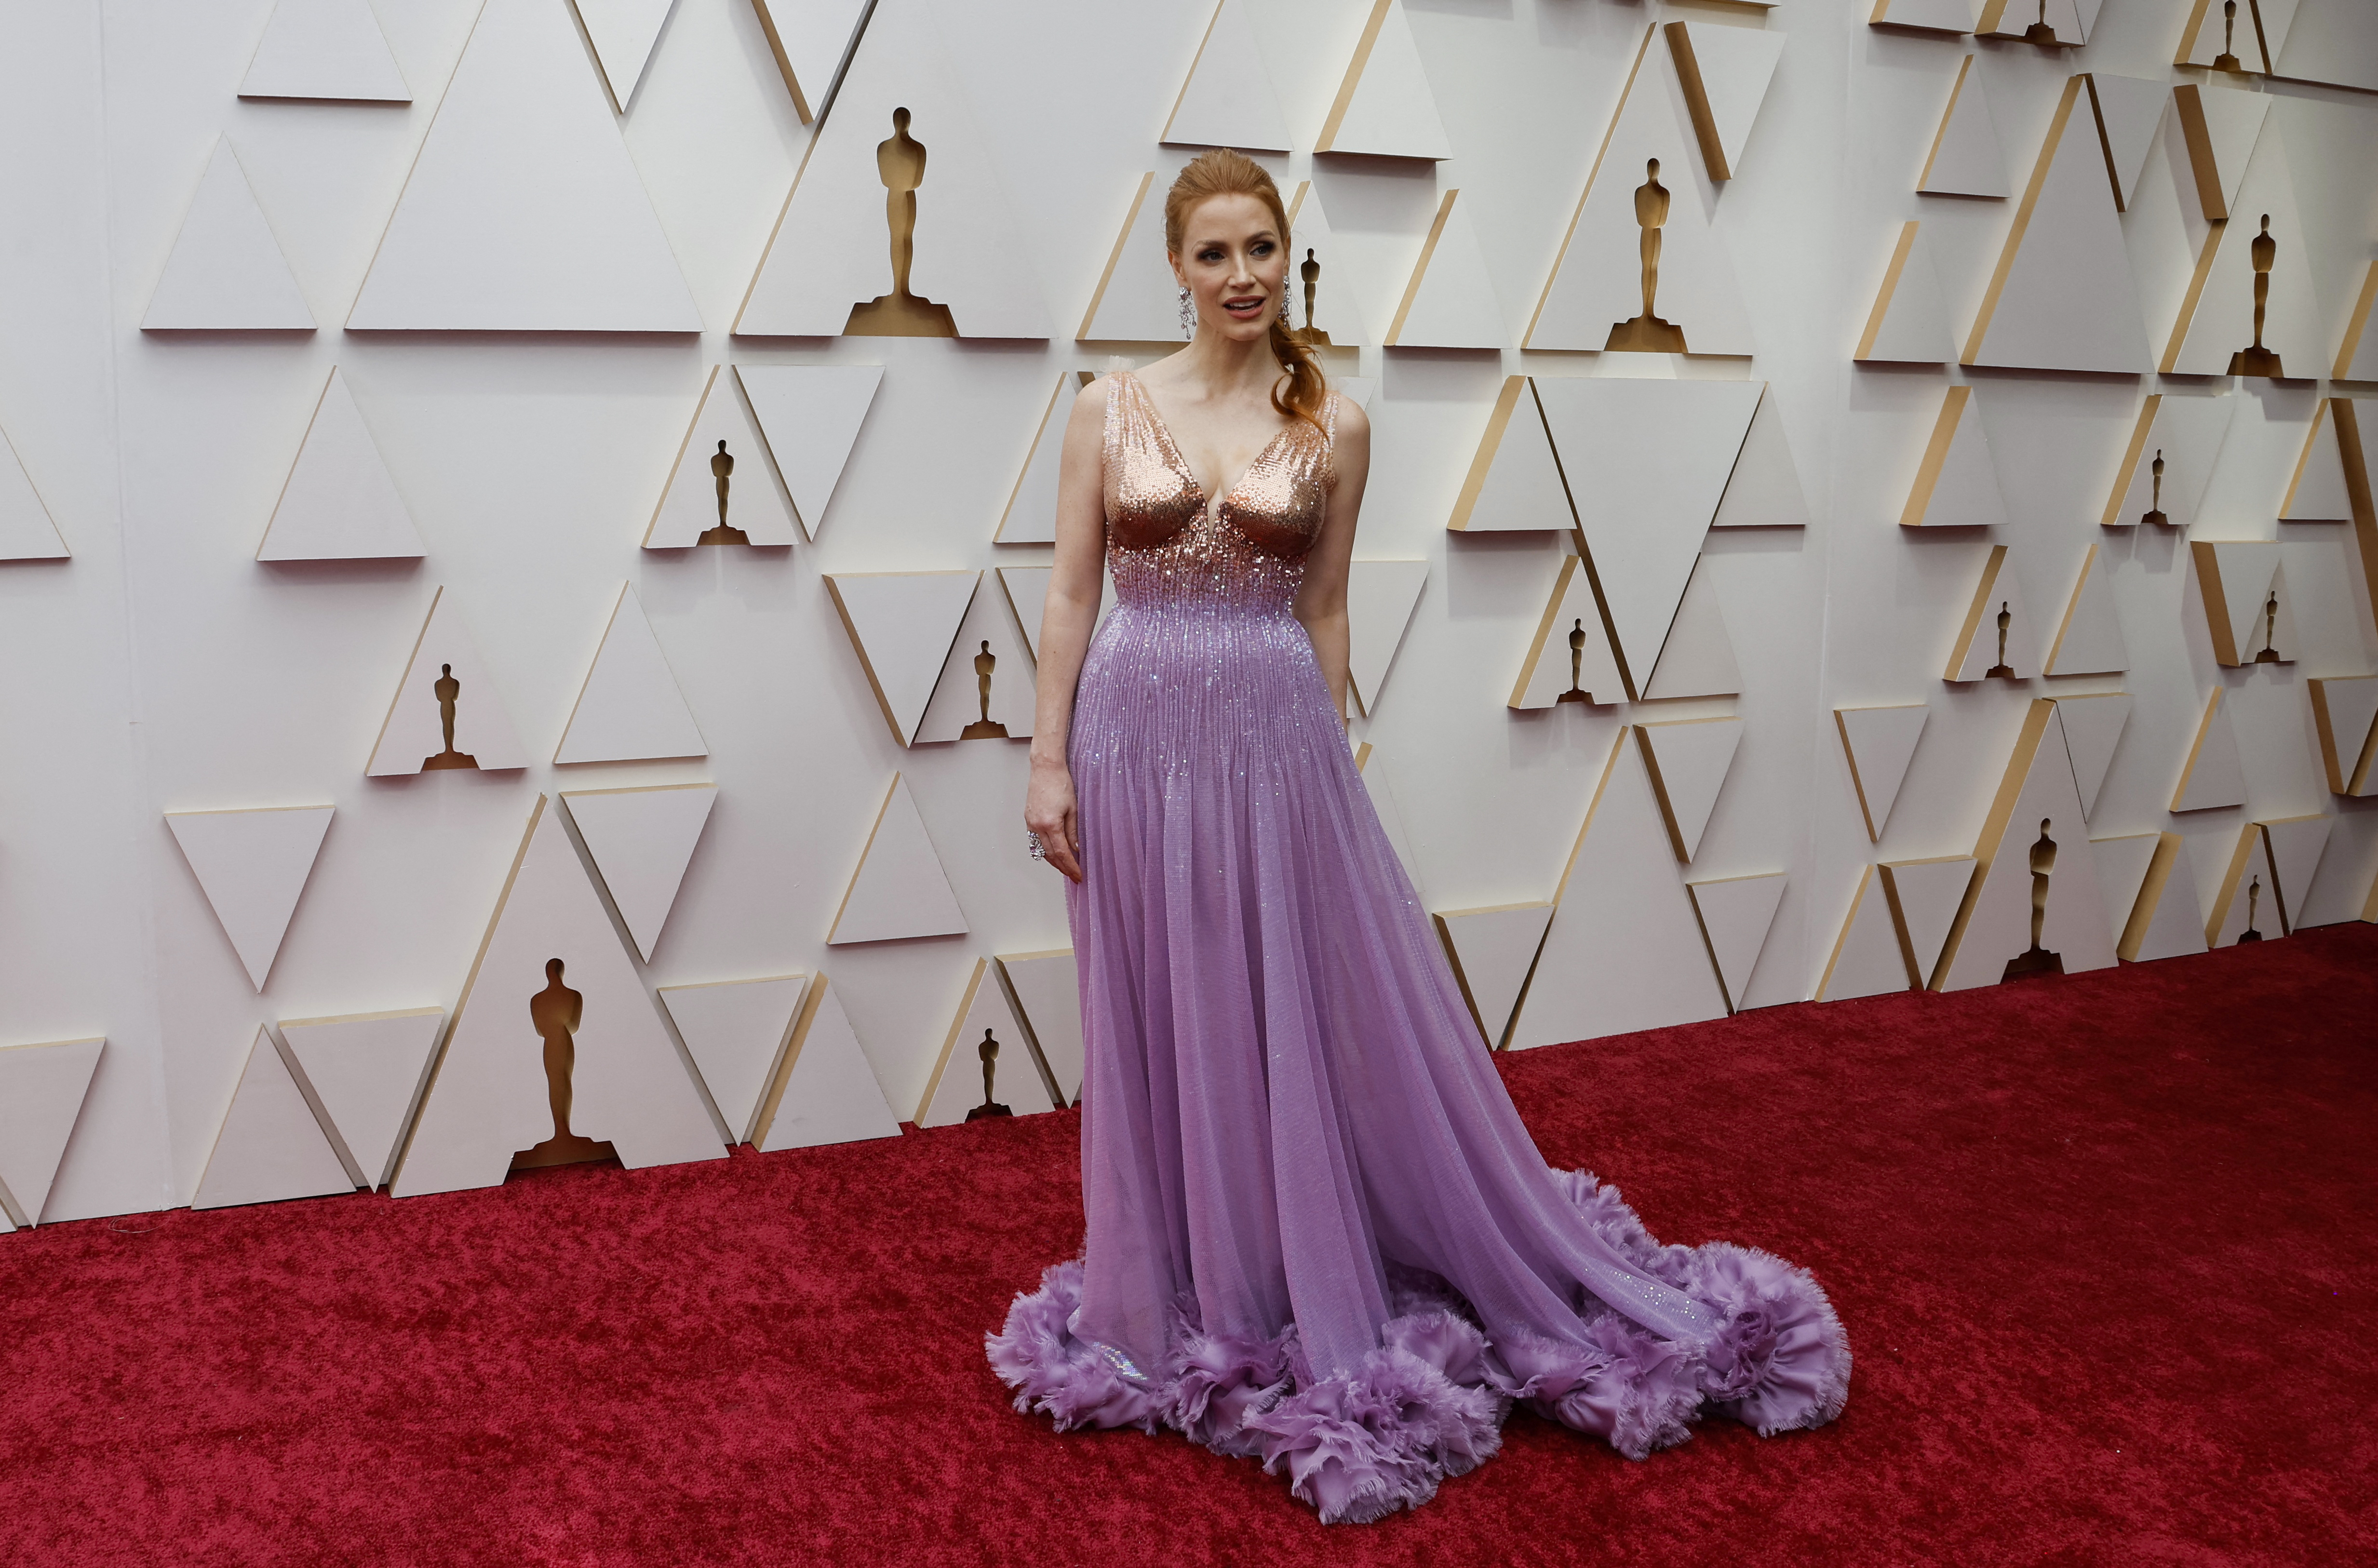 Best Actress nominee Jessica Chastain poses on the red carpet during the Oscars arrivals at the 94th Academy Awards in Hollywood, Los Angeles, California, U.S., March 27, 2022. REUTERS/Eric Gaillard